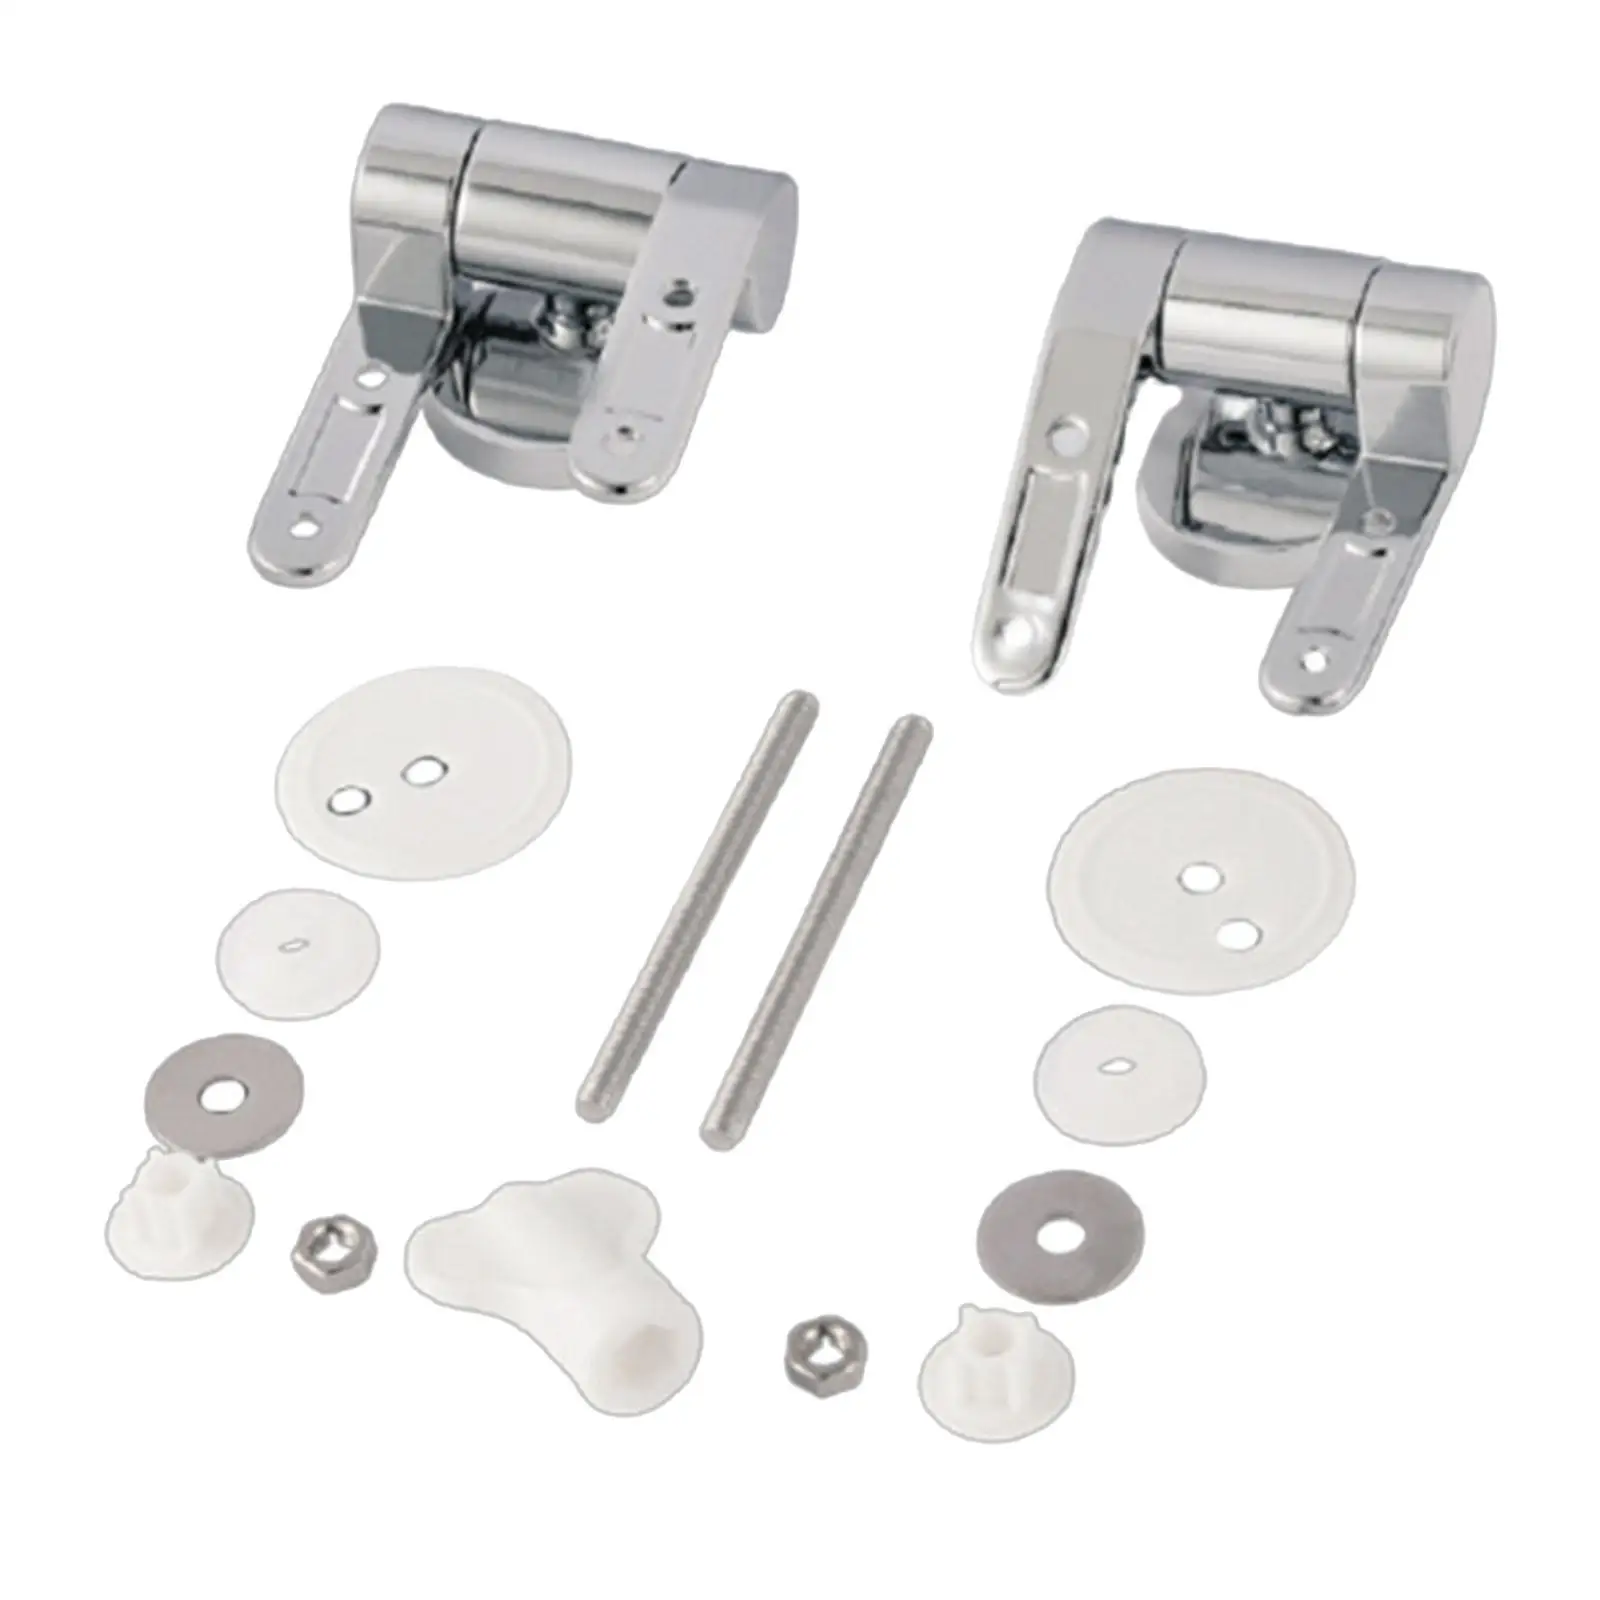 Toilet Seat Hinge Fixtures Mounting Fixed Joint Fixing Bracket for Flipping Rice Cooker Lids Washing Machine Telescopic Kitchen